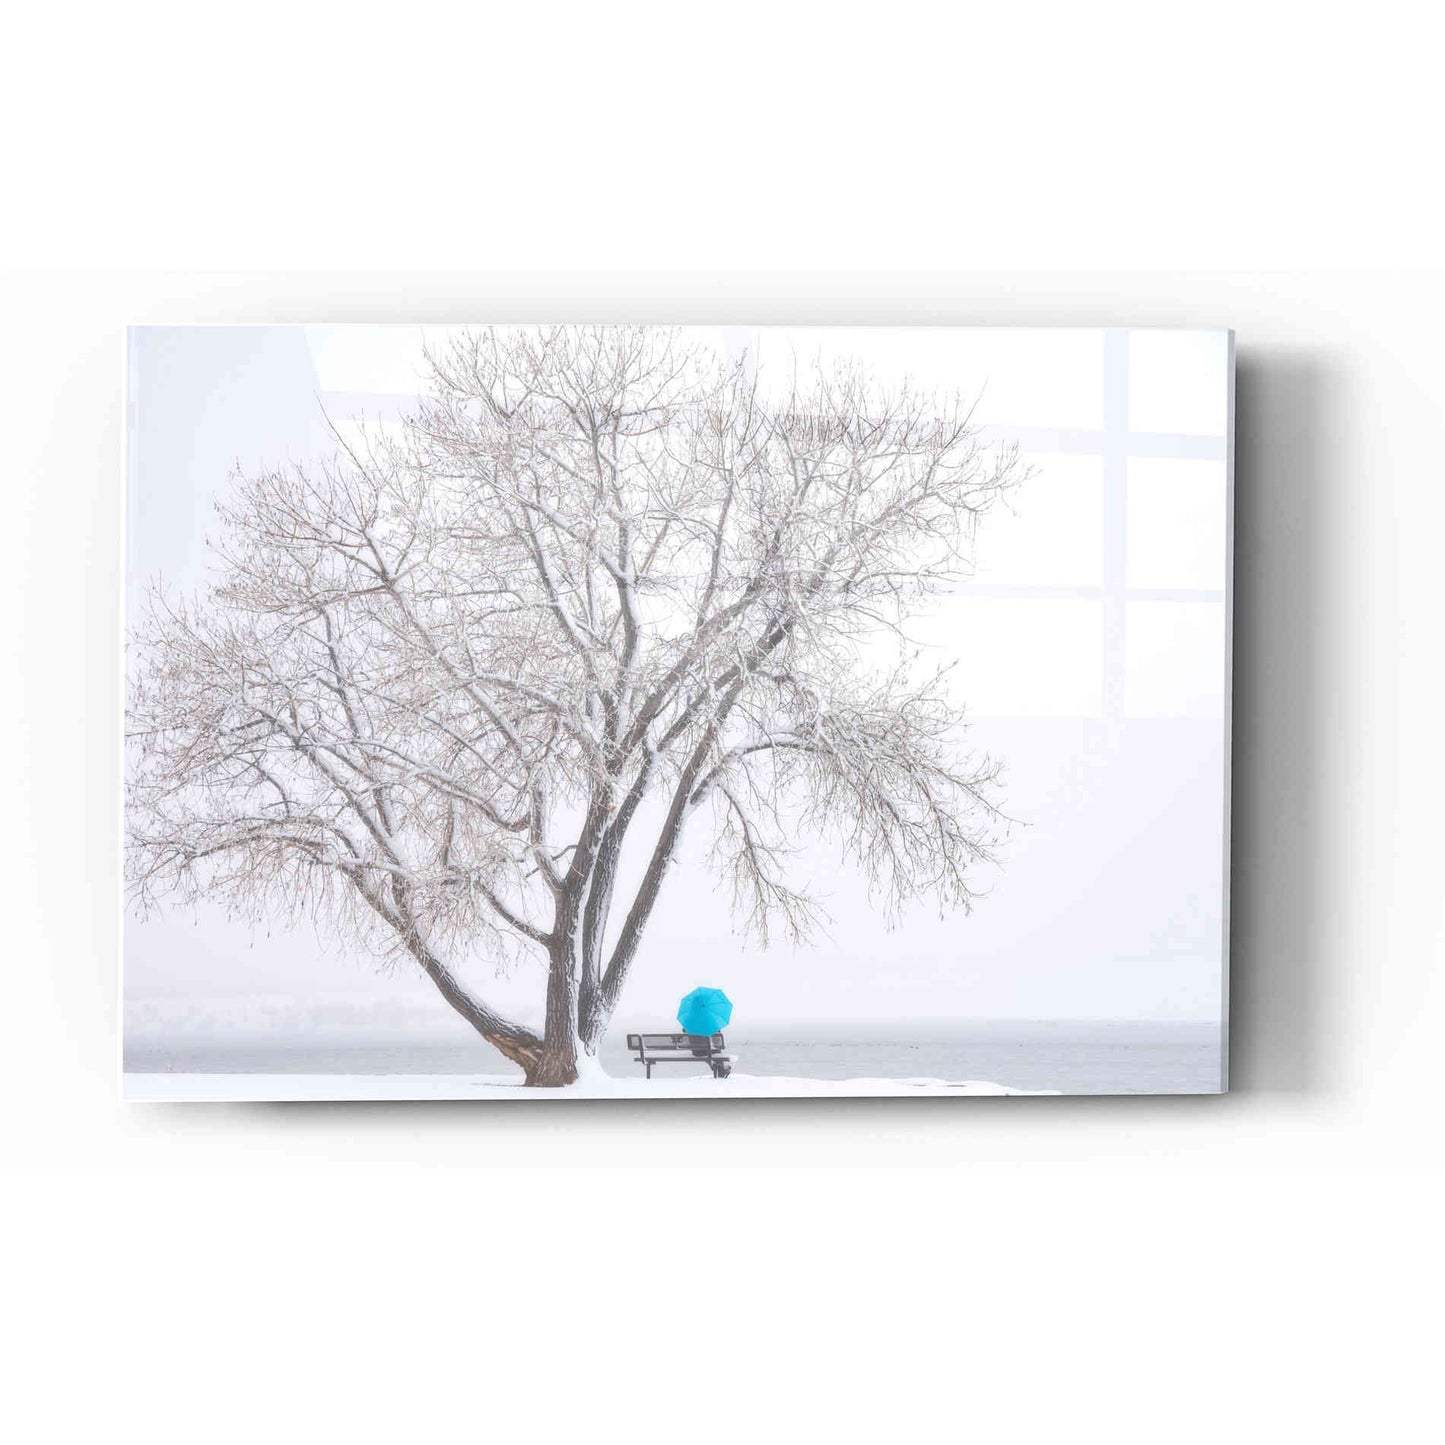 Epic Art "Another Winter Alone" by Darren White, Acrylic Glass Wall Art,12x16